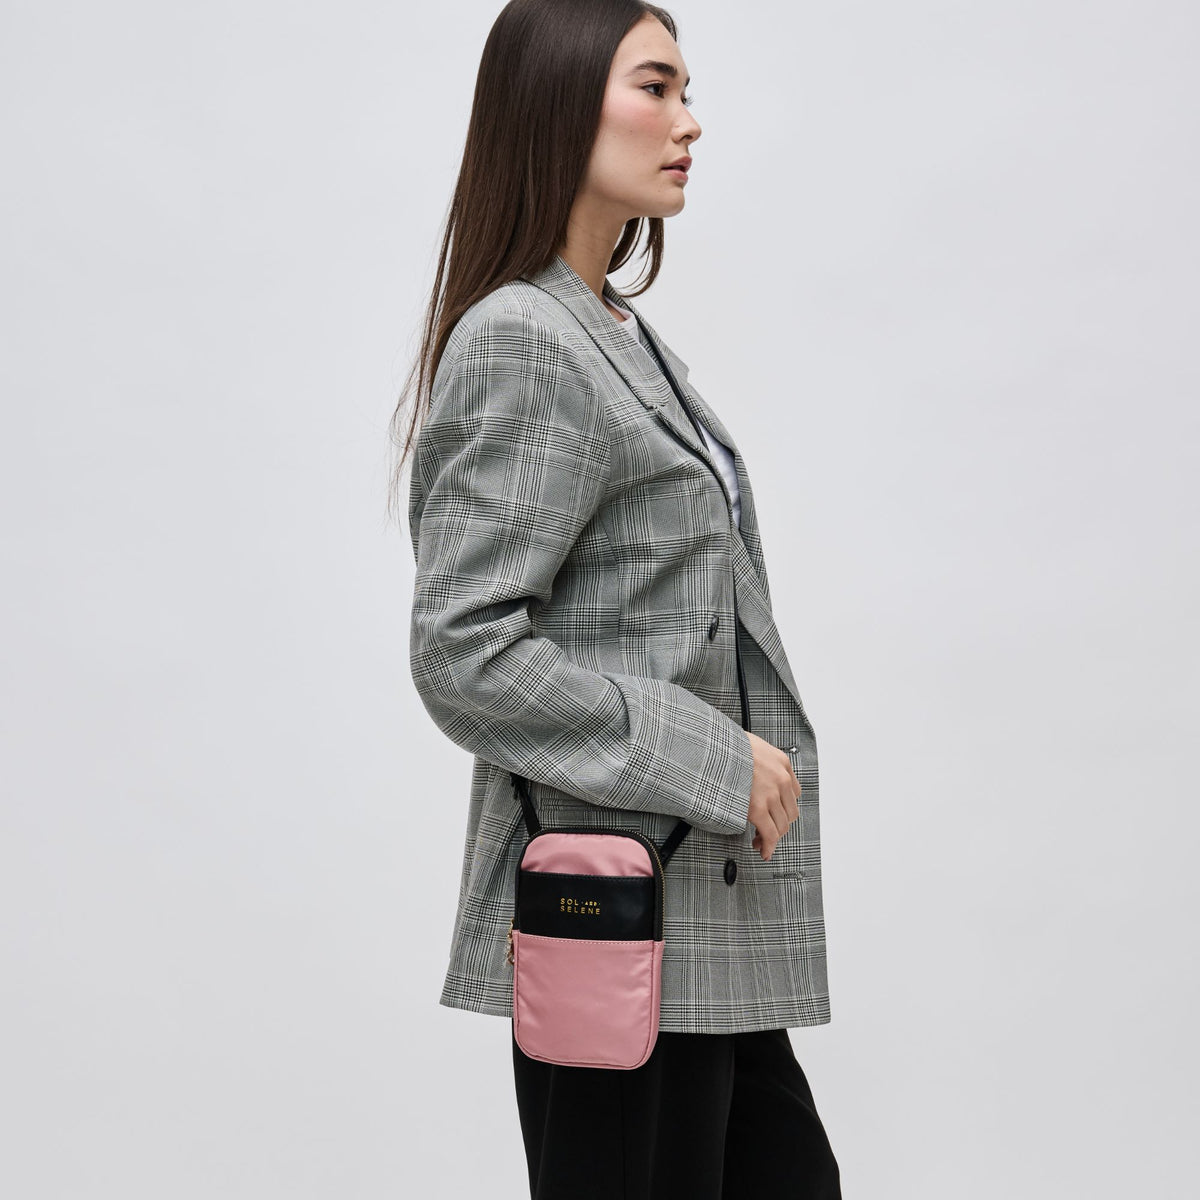 Woman wearing Pastel Pink Sol and Selene By My Side Crossbody 841764106320 View 1 | Pastel Pink